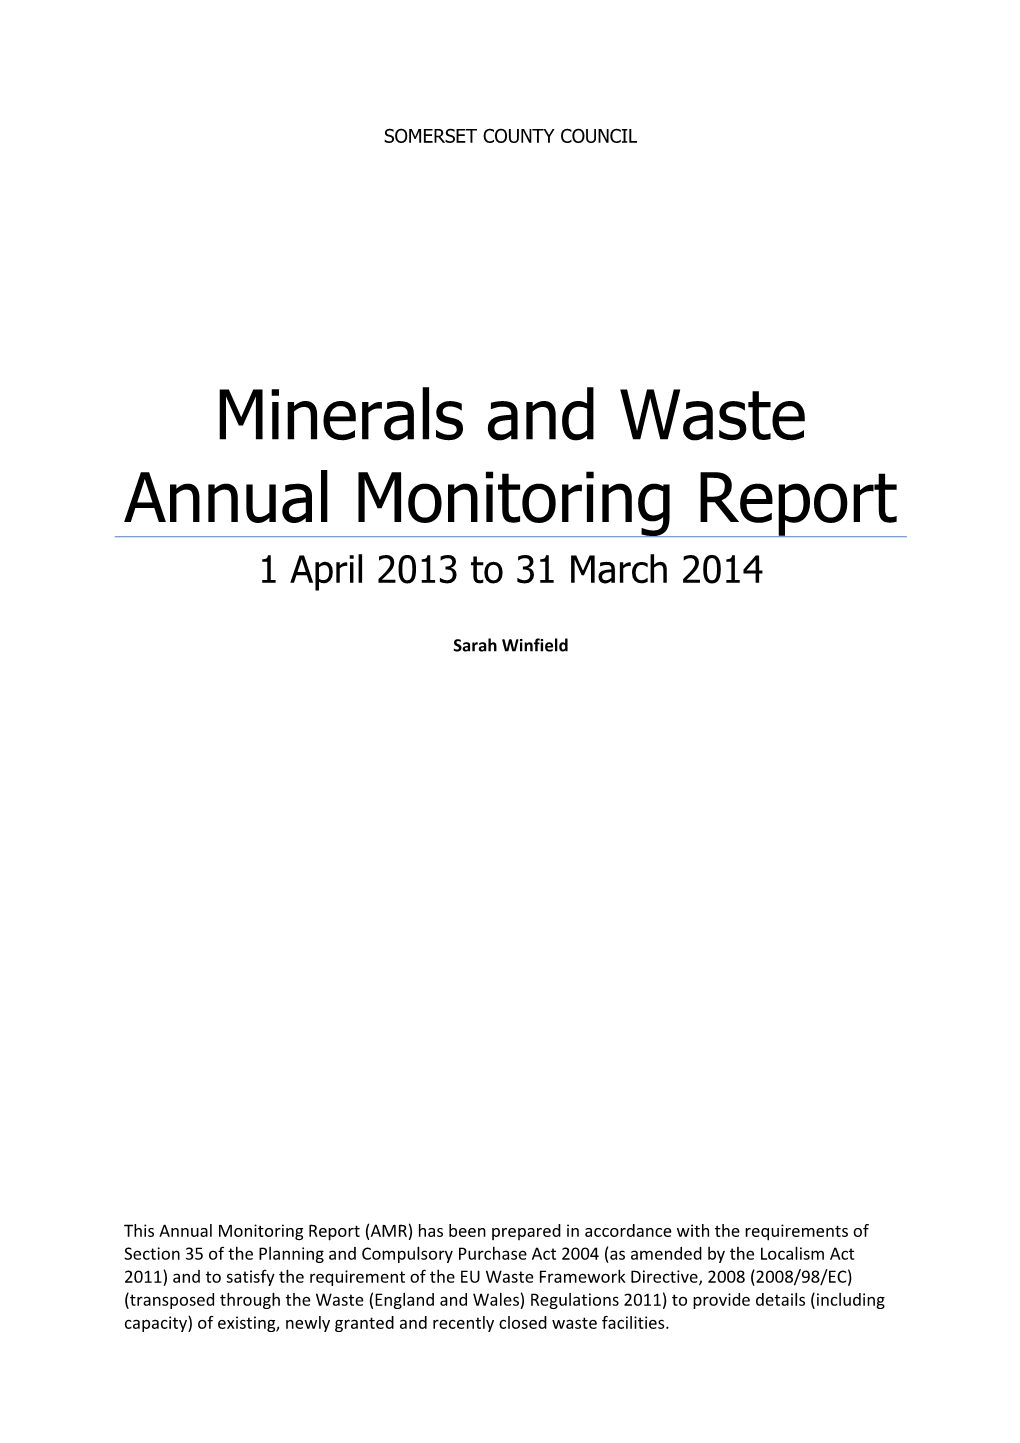 Minerals and Waste Annual Monitoring Report 1 April 2013 to 31 March 2014